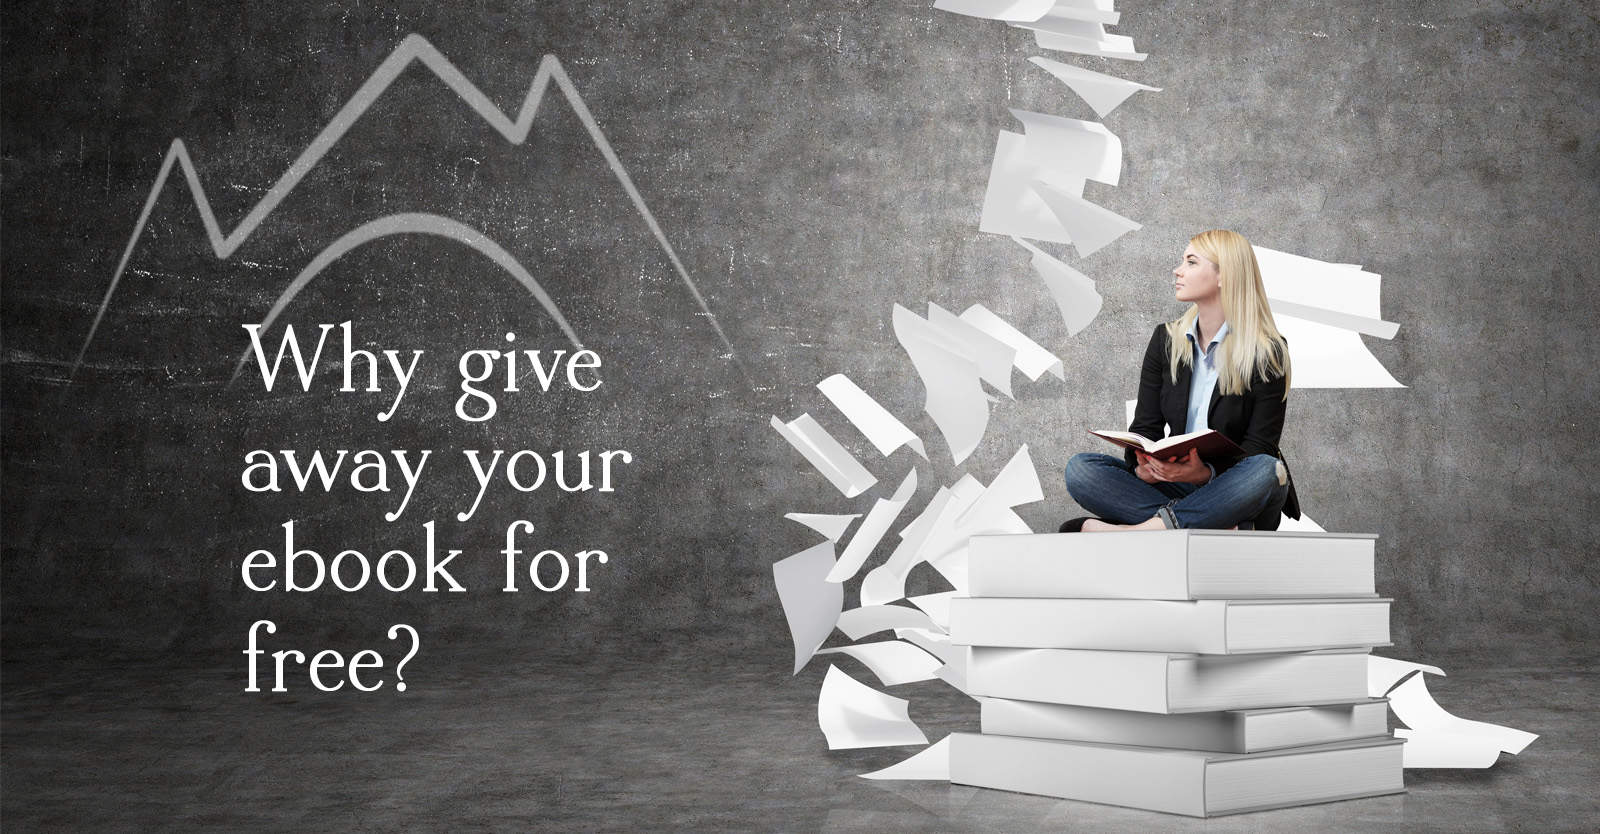 Why give away your ebook for free